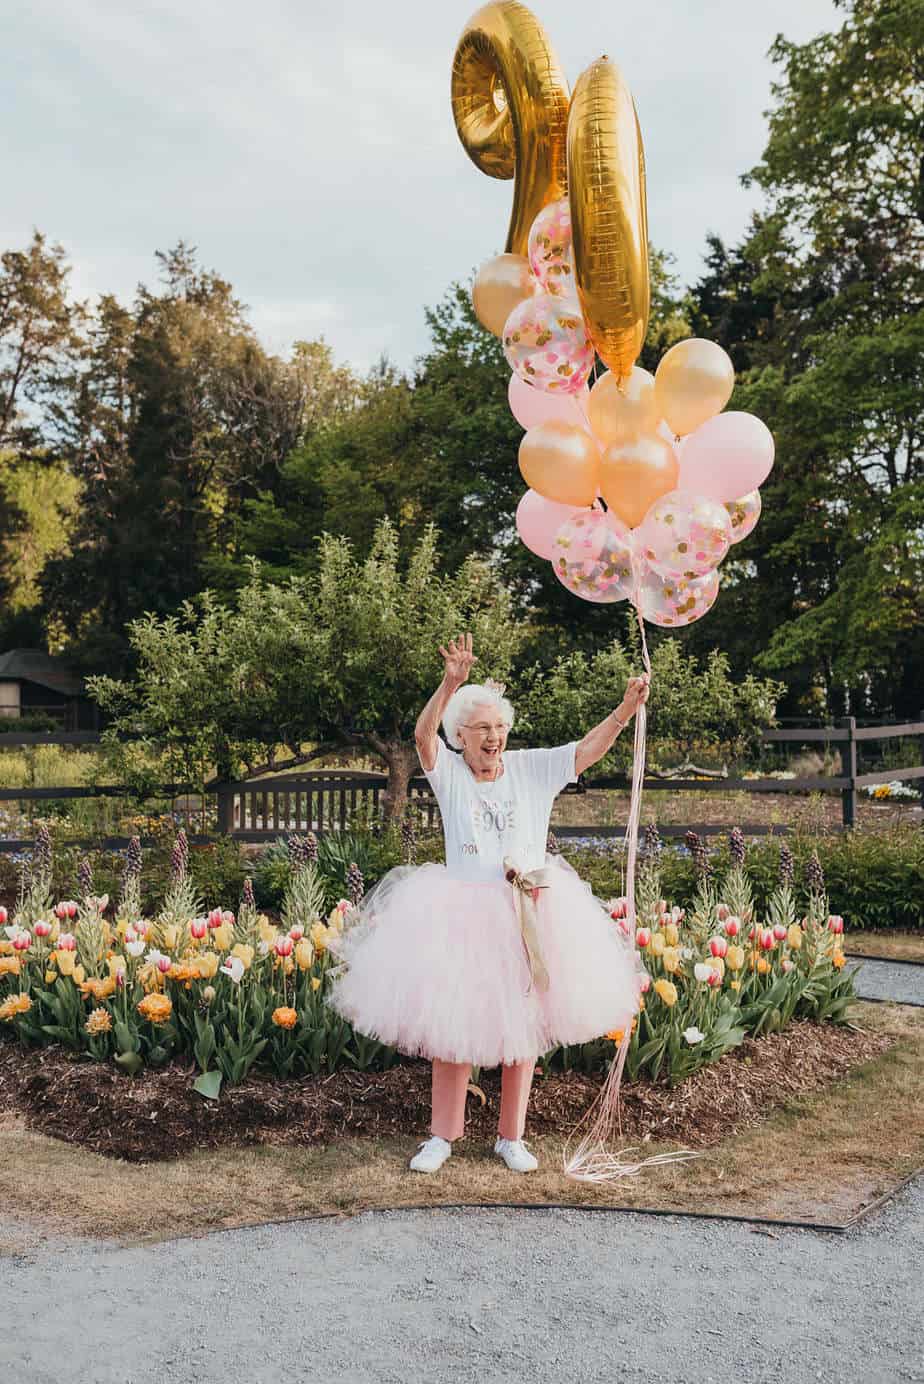 A grandma wearing a pink tutu while holding balloons